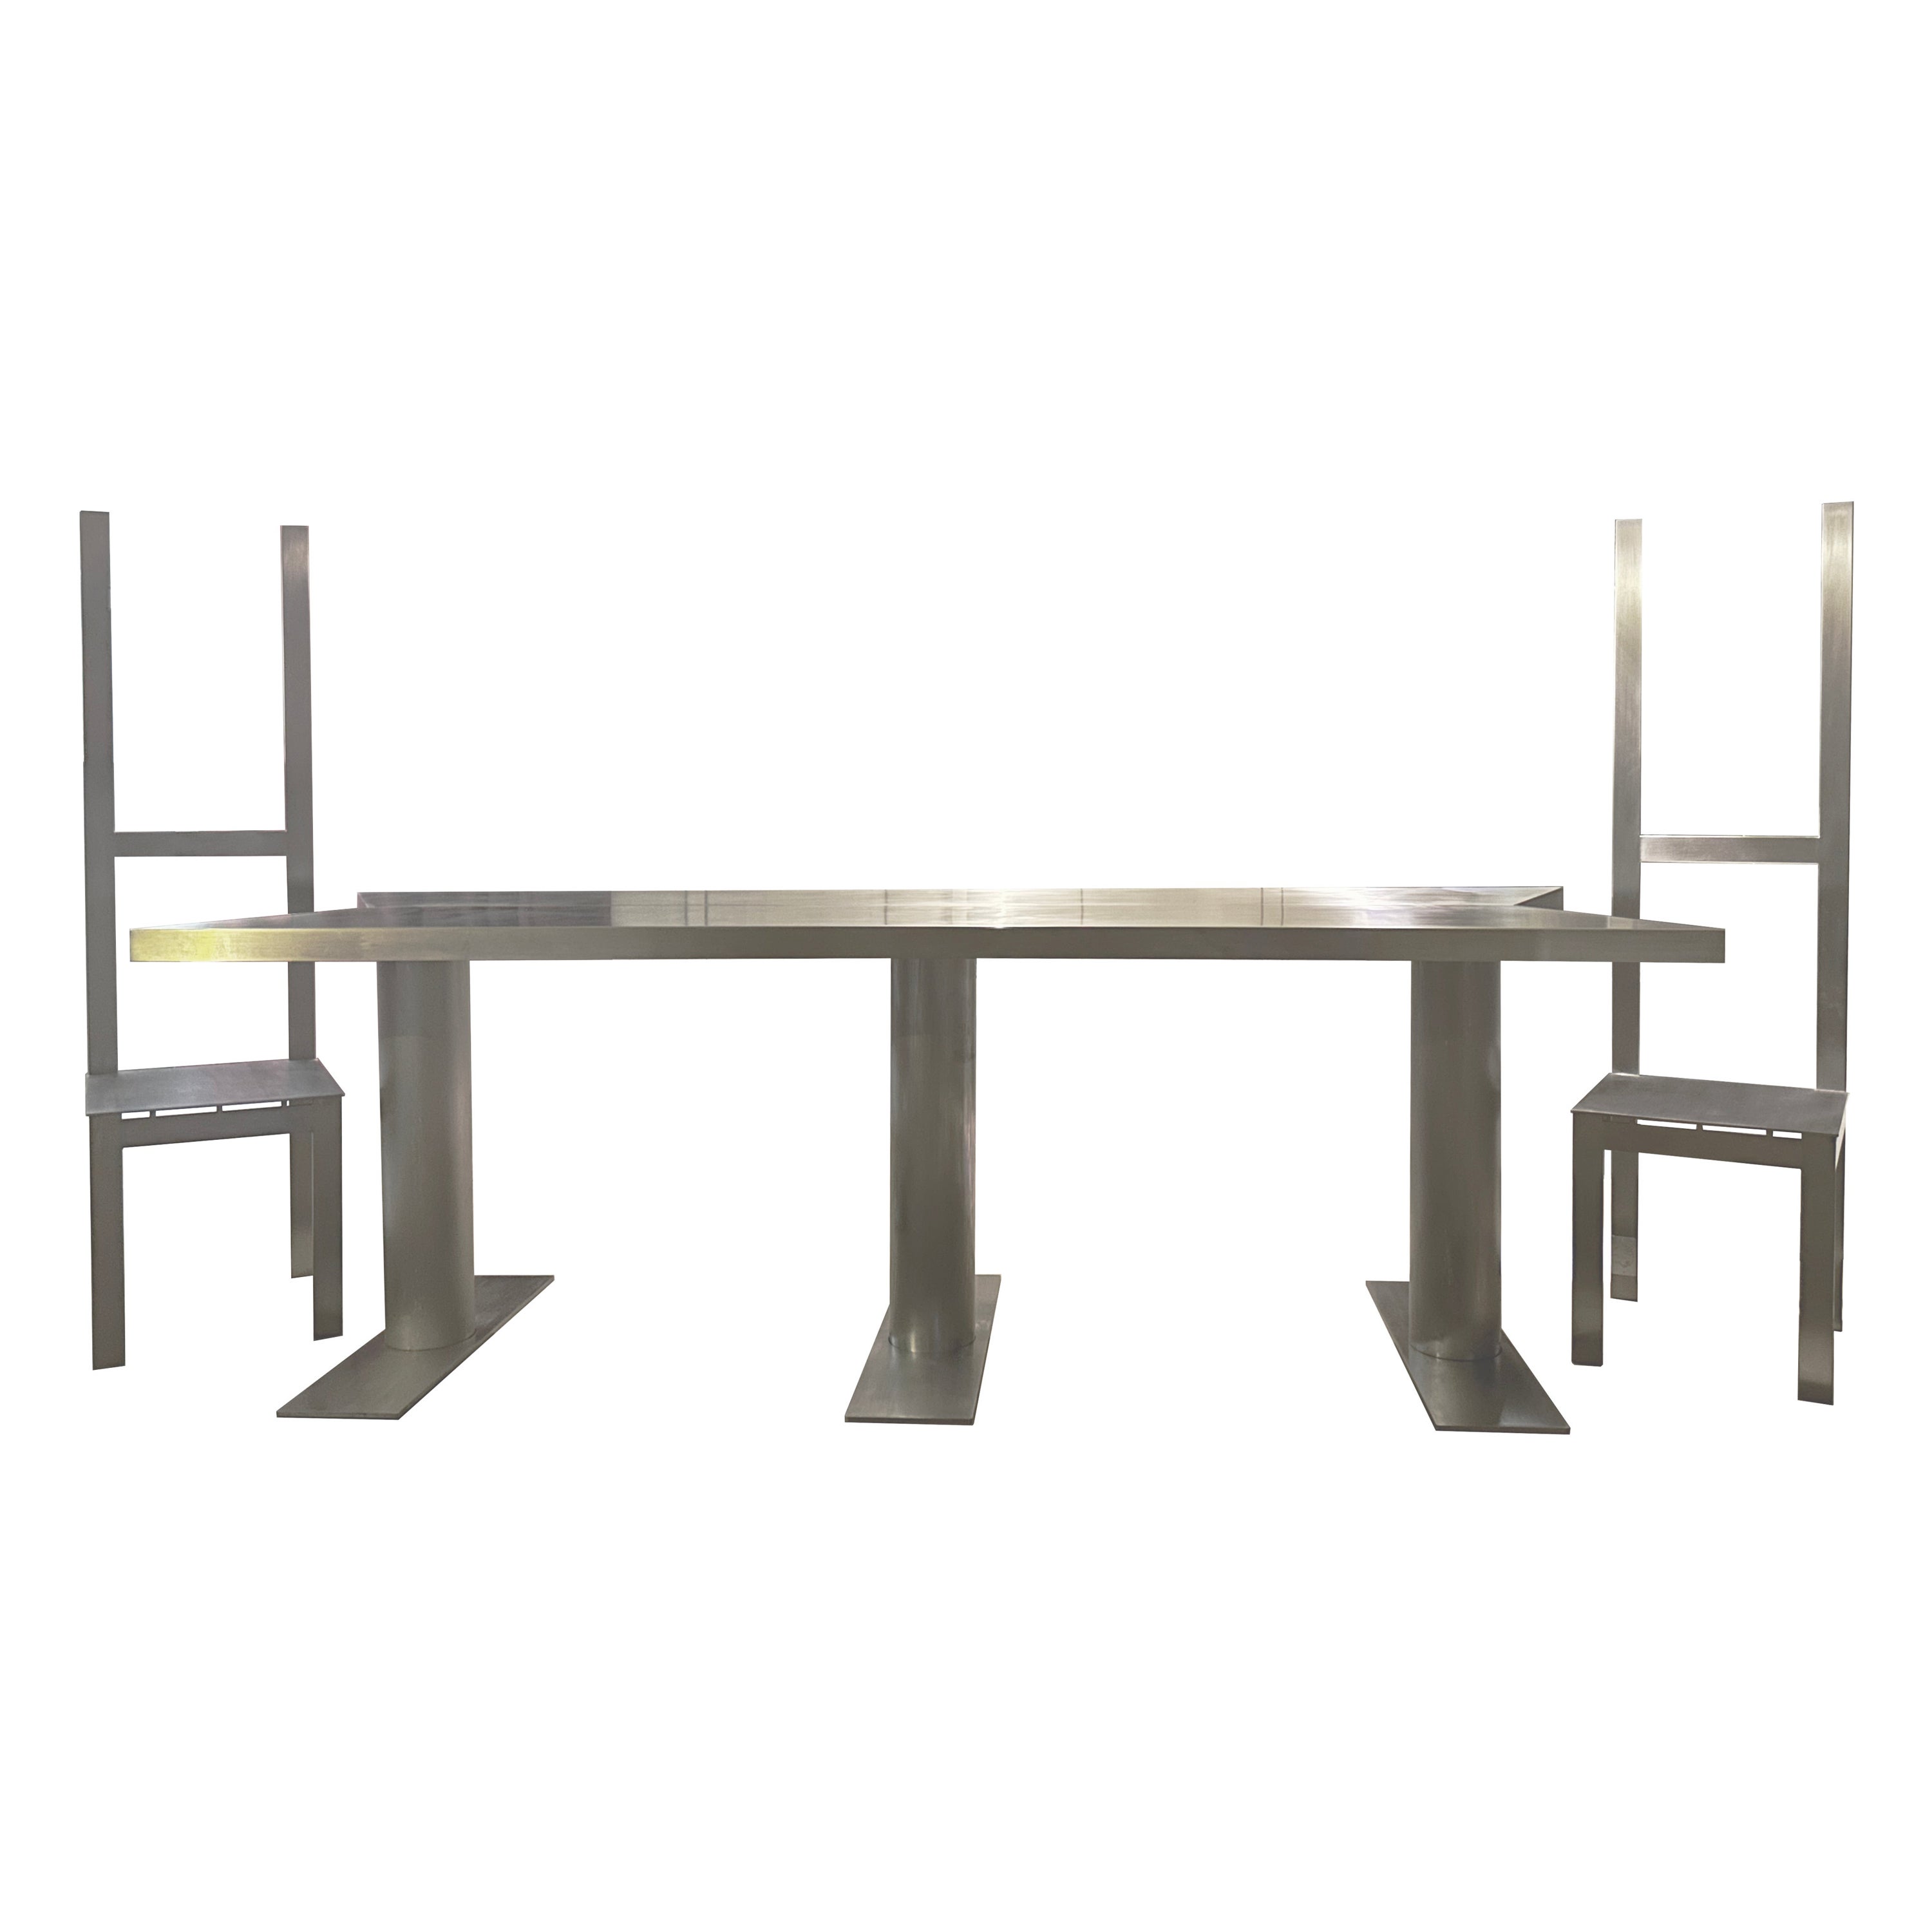 "Big Iron" Chairs / "Running Gun" Table, Iron, James Vincent Milano, Italy, 2023 For Sale